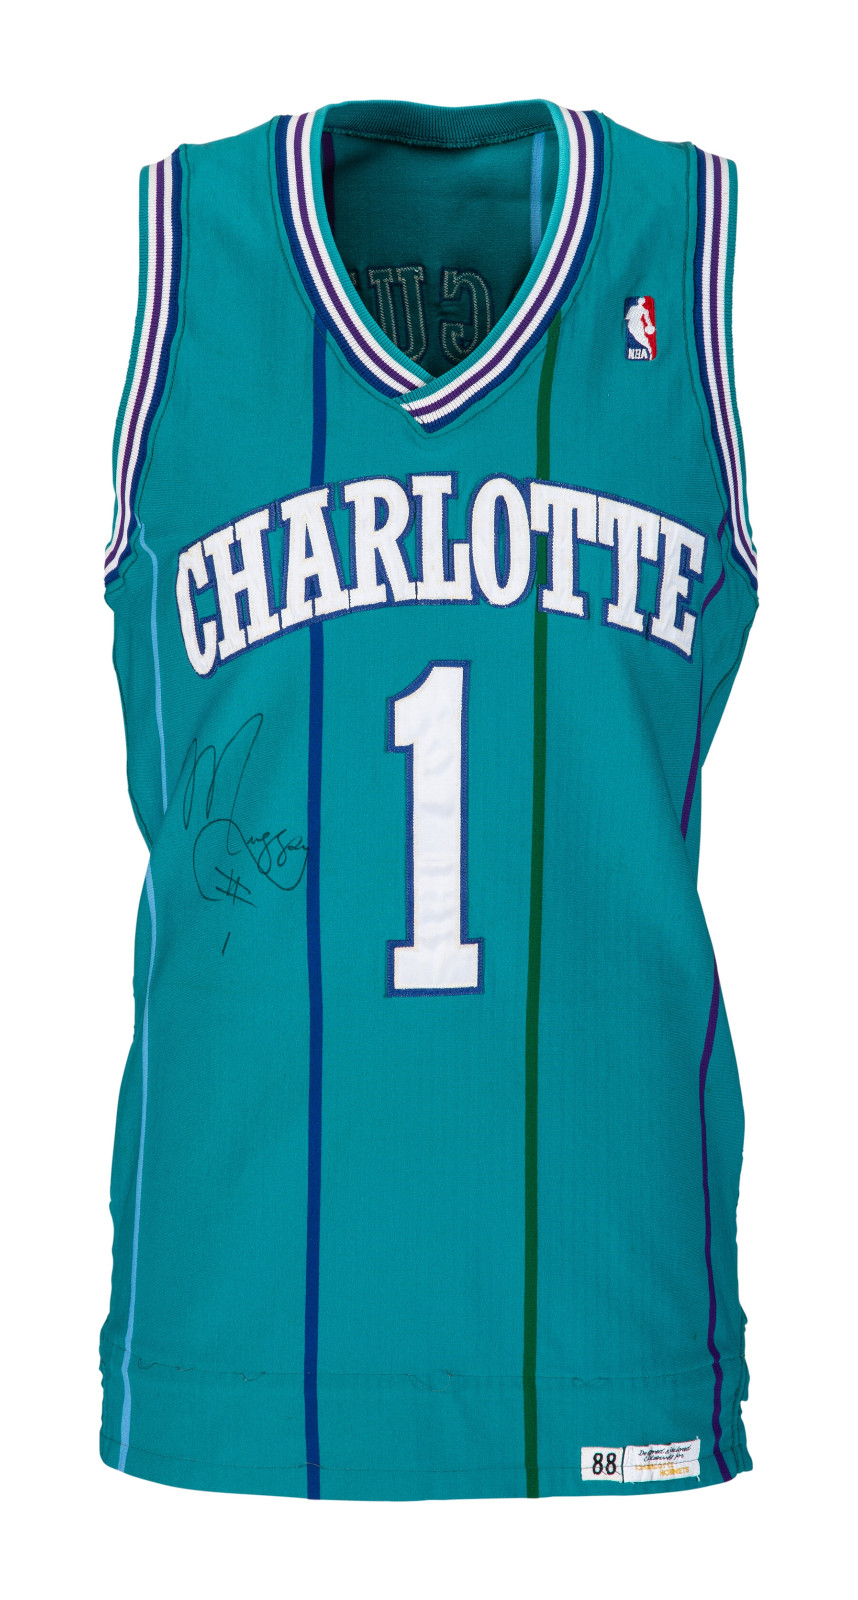 Charlotte 19881997 Home Jersey